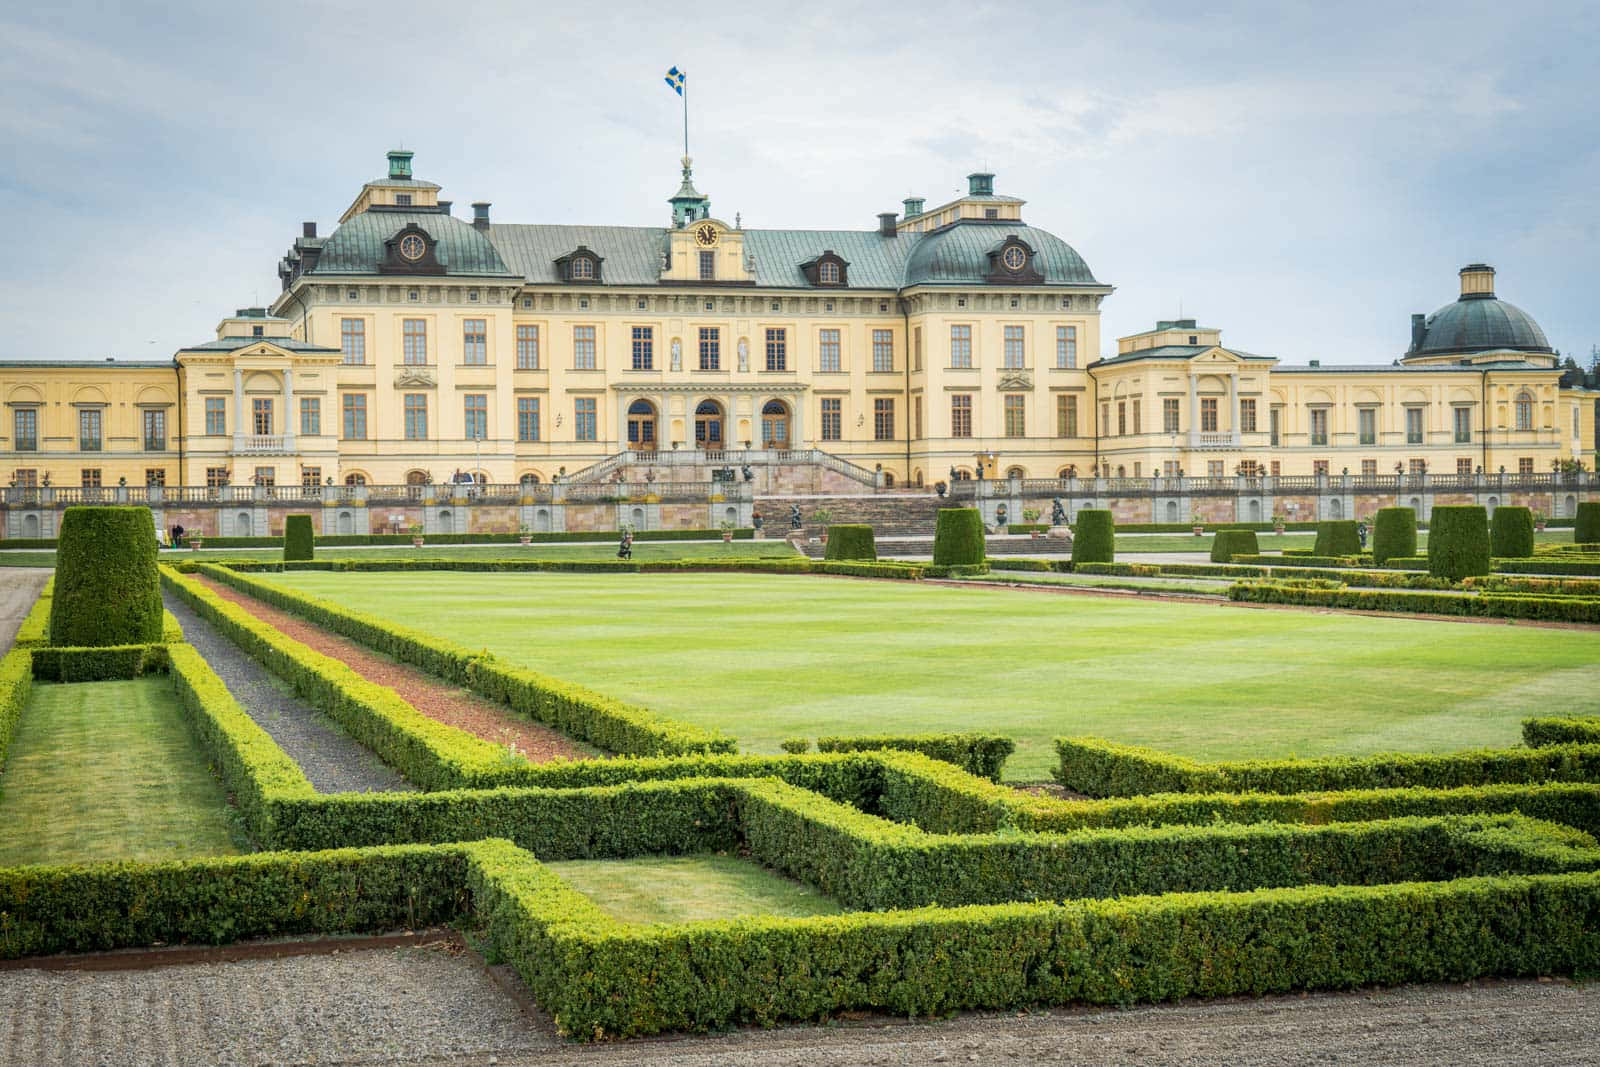 Majestic Drottningholm Palace on a brilliant day Wallpaper